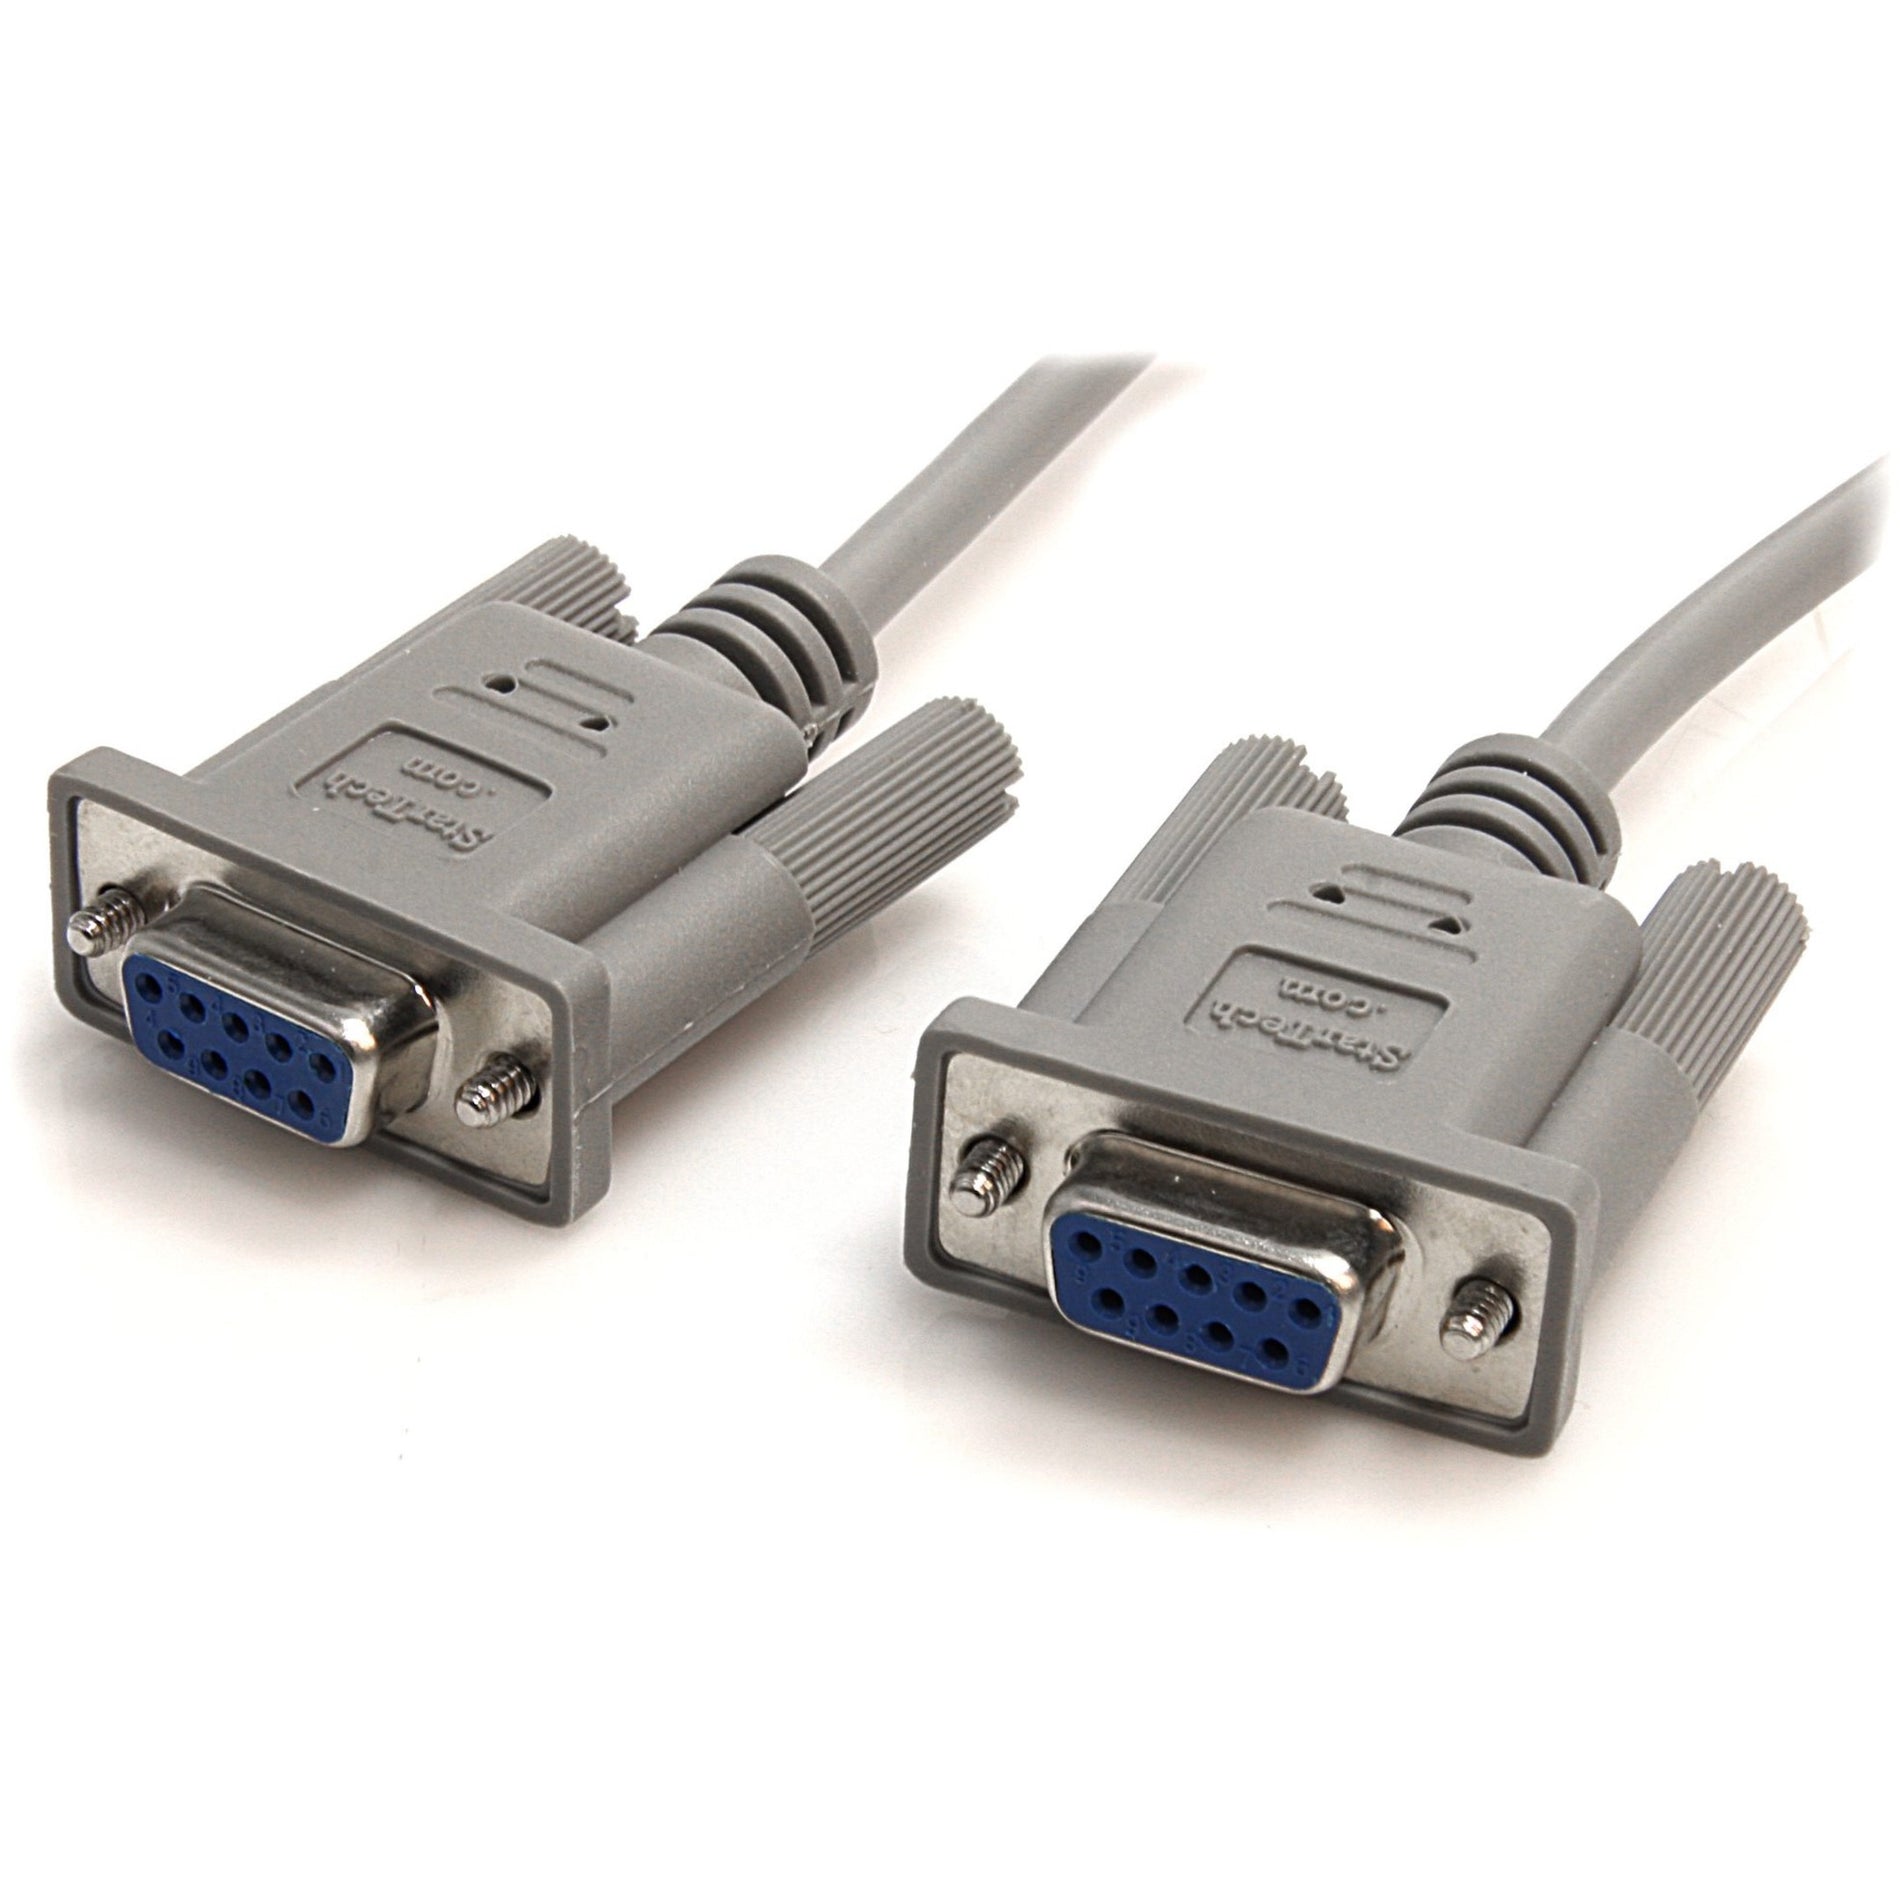 StarTech.com SCNM9FF Serial Null Modem Cable, 10 ft, Copper Conductor, Nickel Plated Connectors, PC Printer Modem Compatible